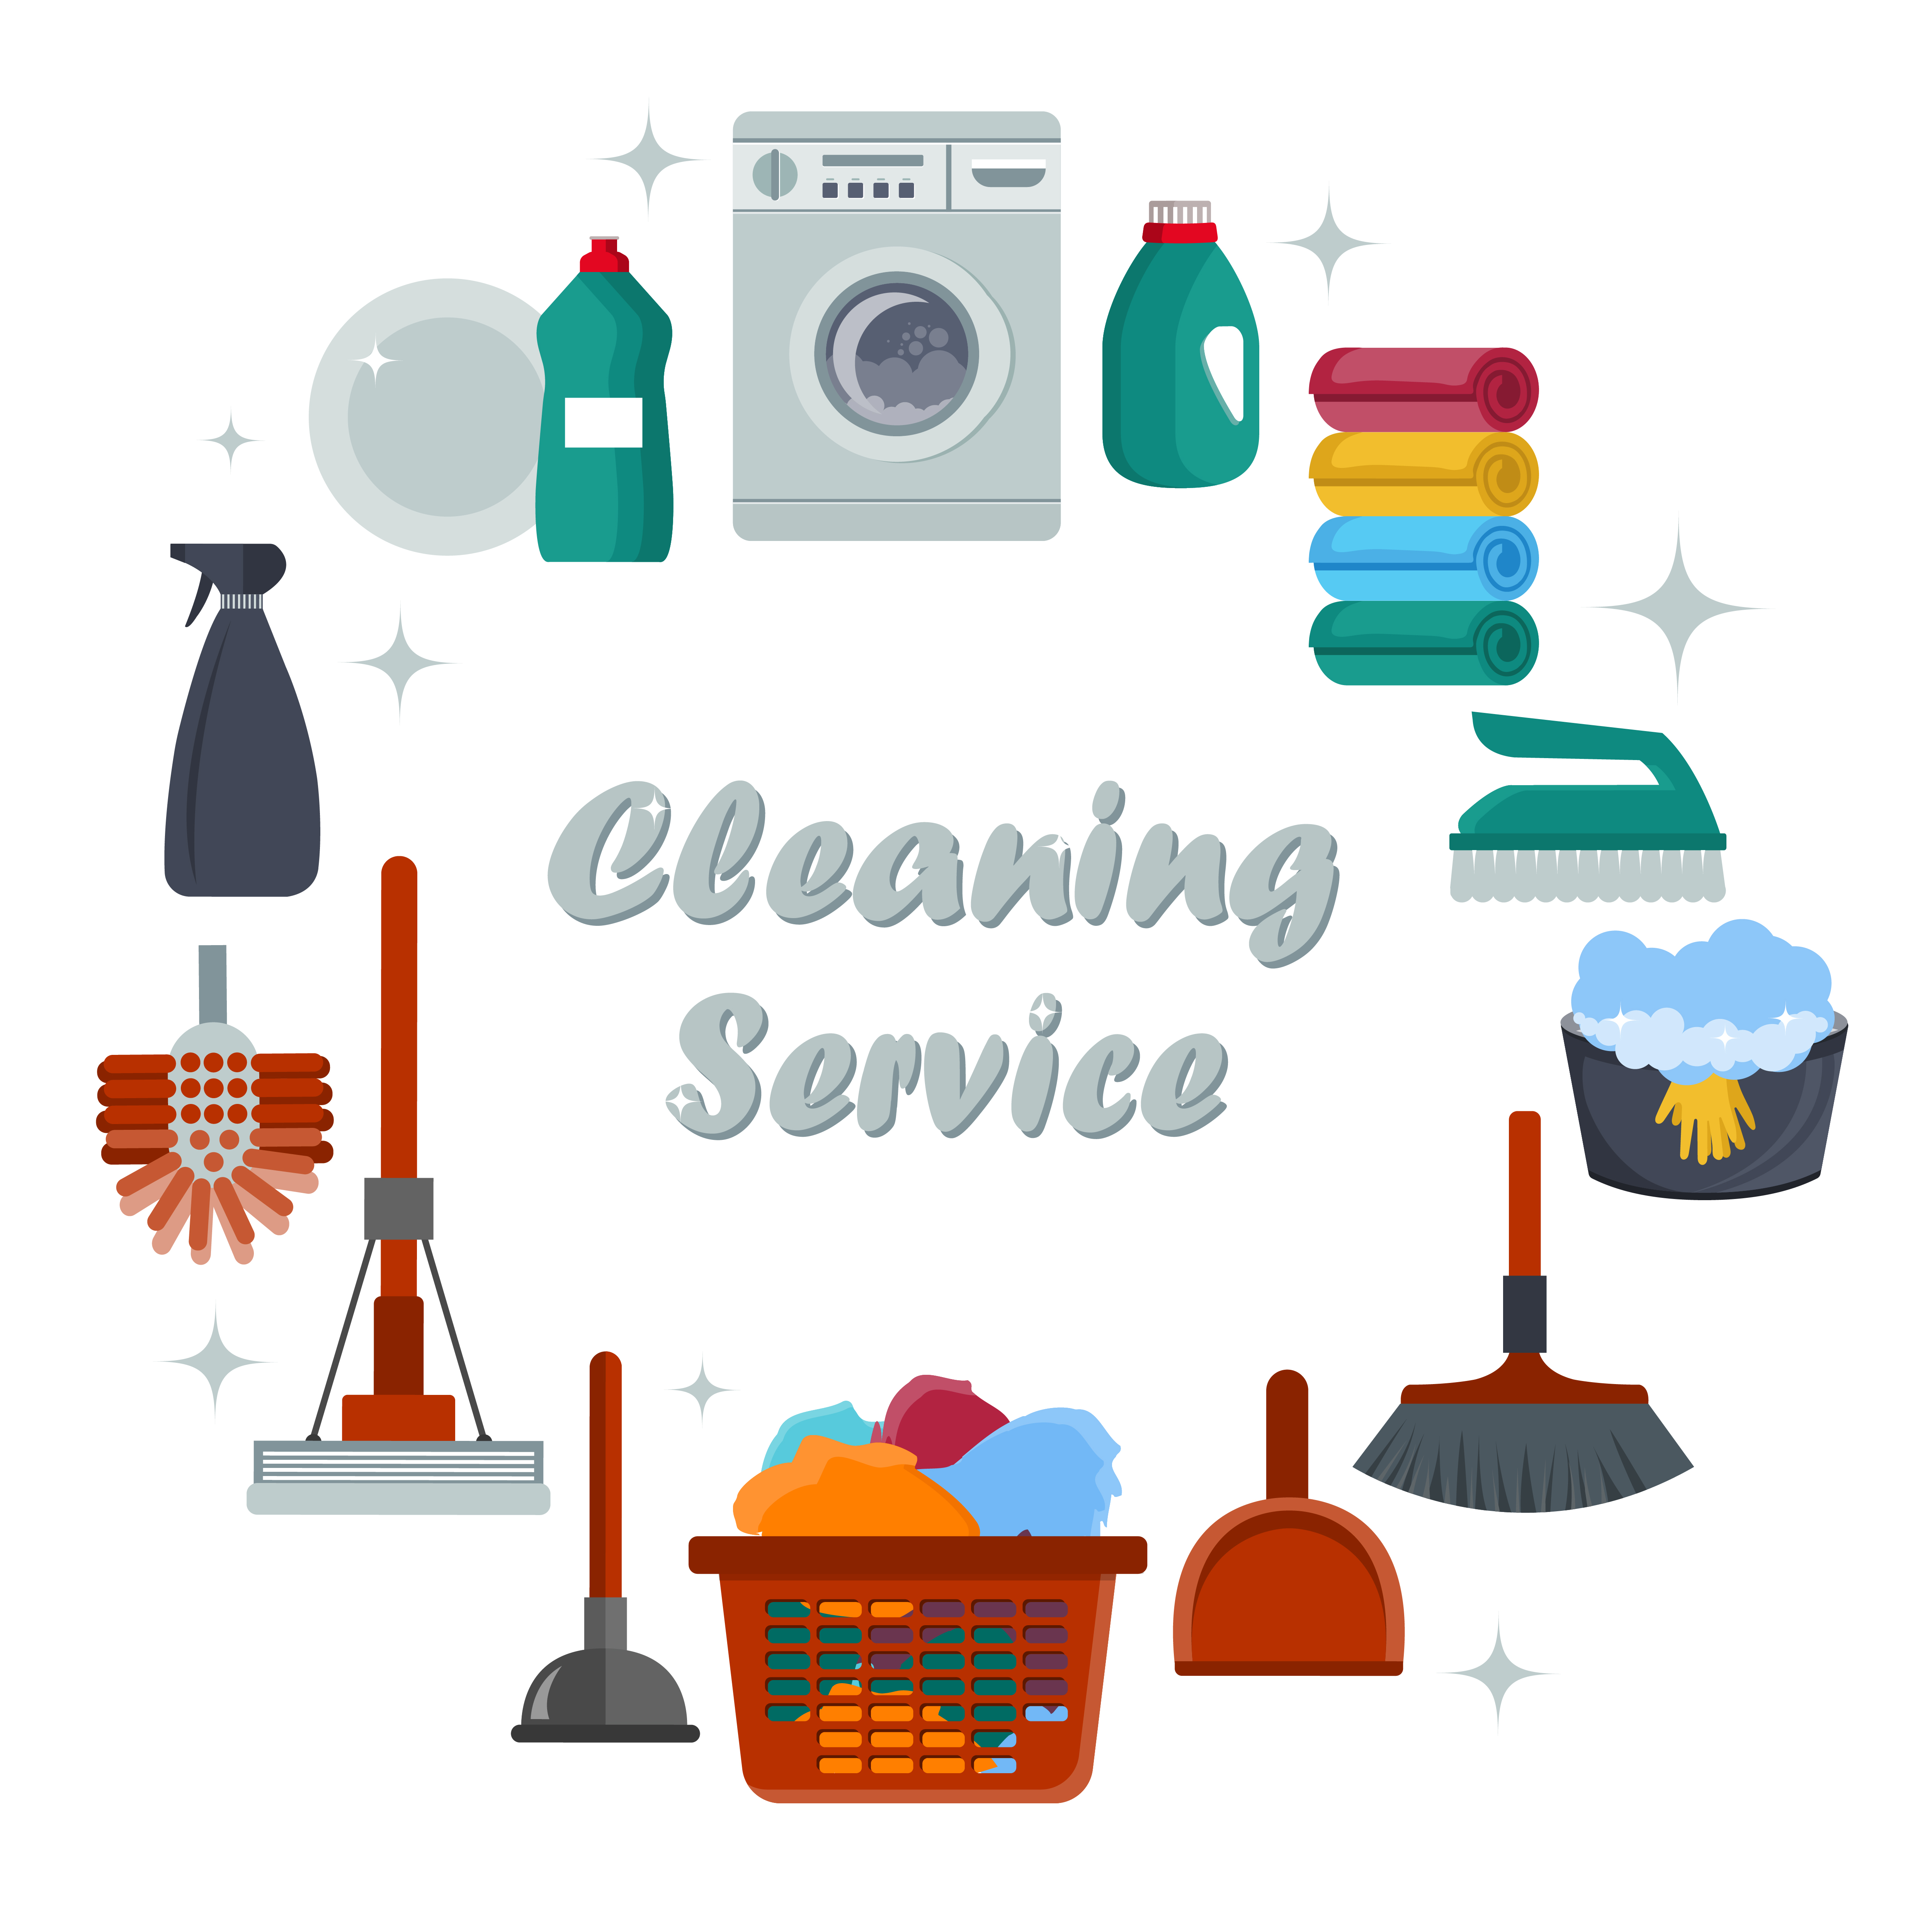 Equipment Cleaning service concept - Download Free Vectors, Clipart ...